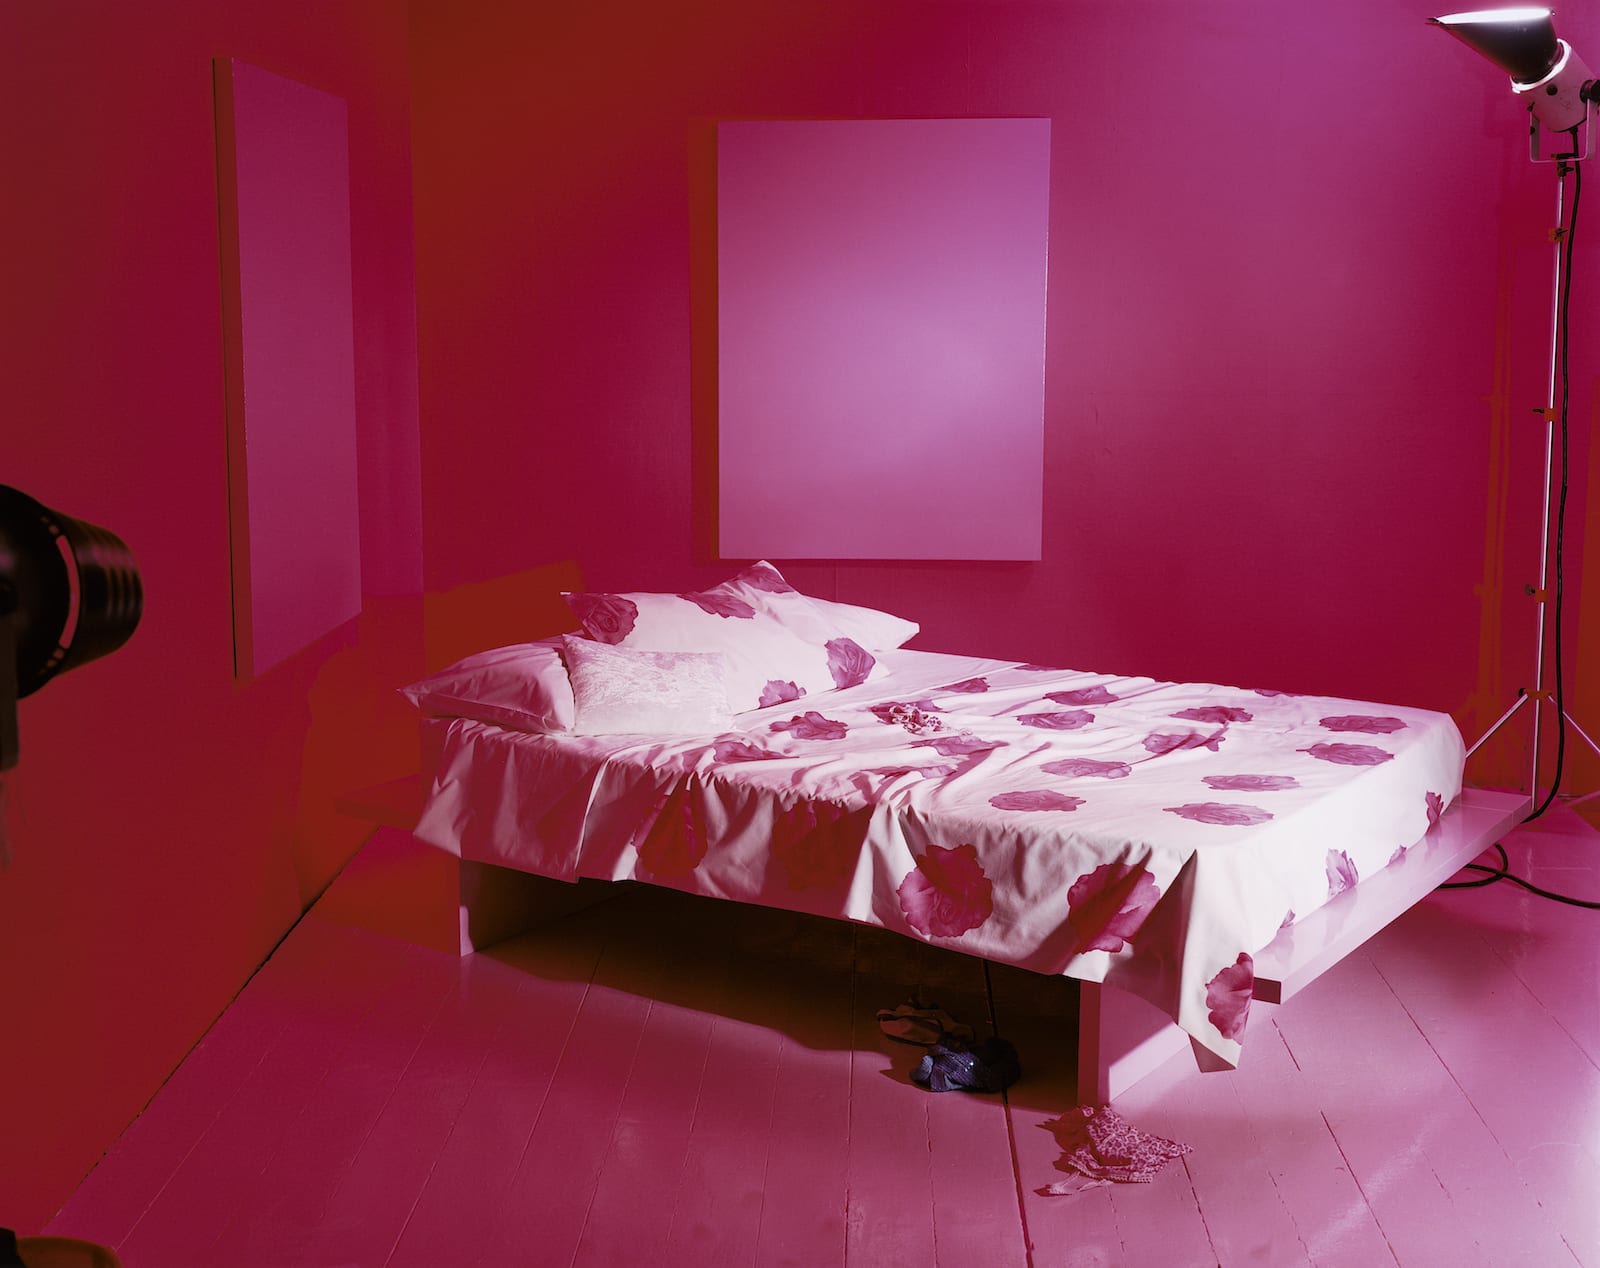 Egg shell pink set, from the series Empty Porn Sets, 2010 © Jo Broughton